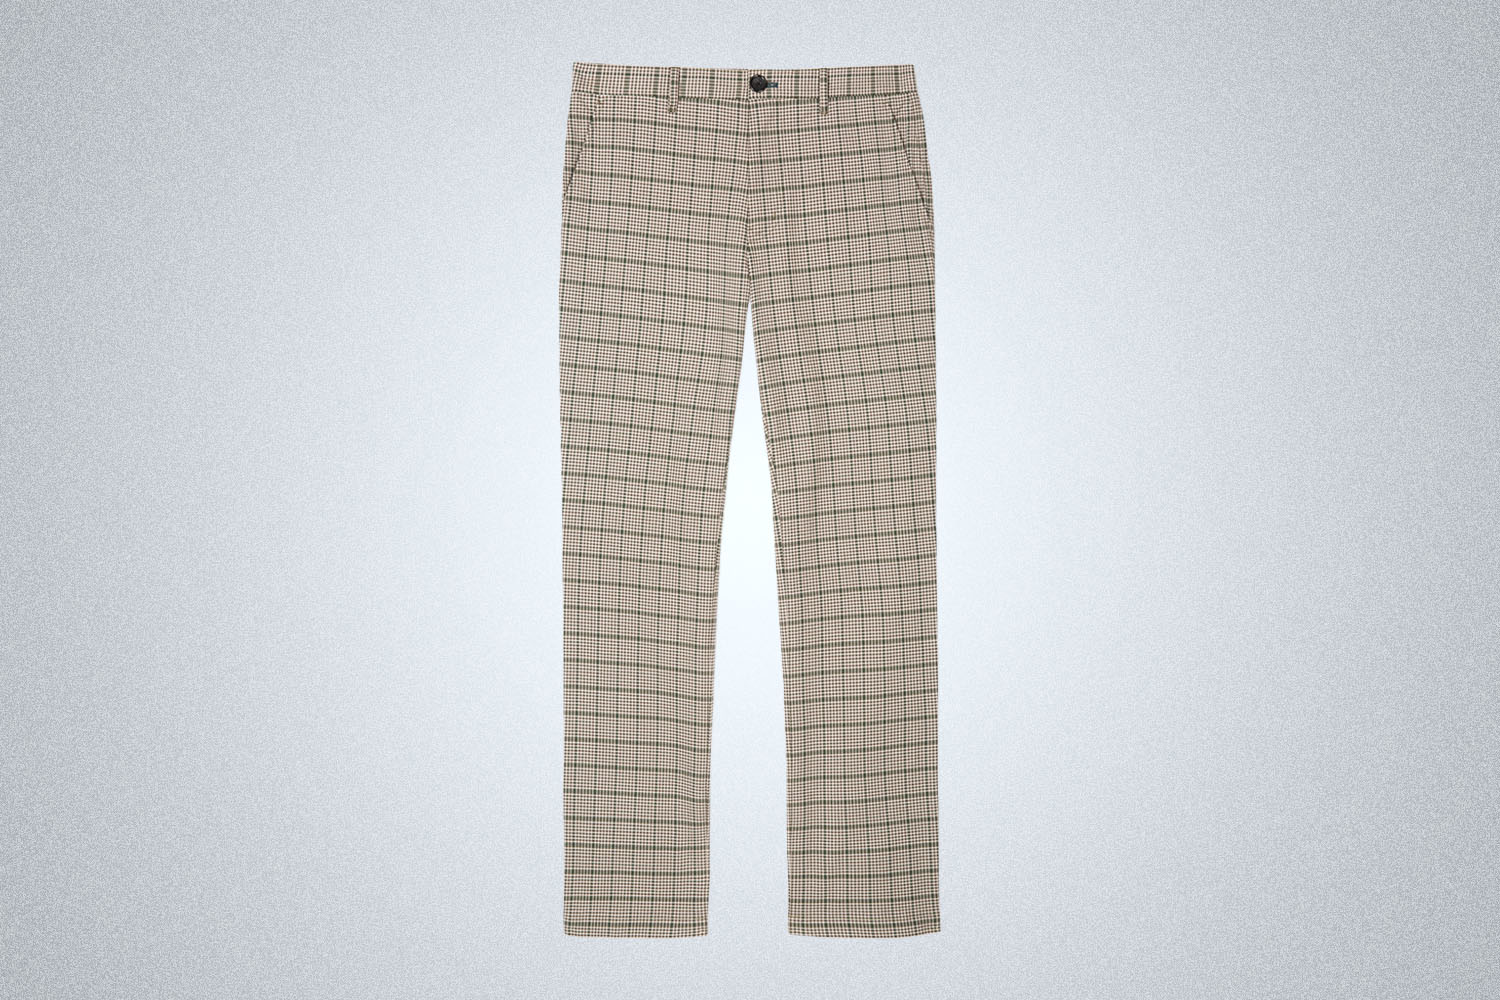 a pair fo chinos on a grey background